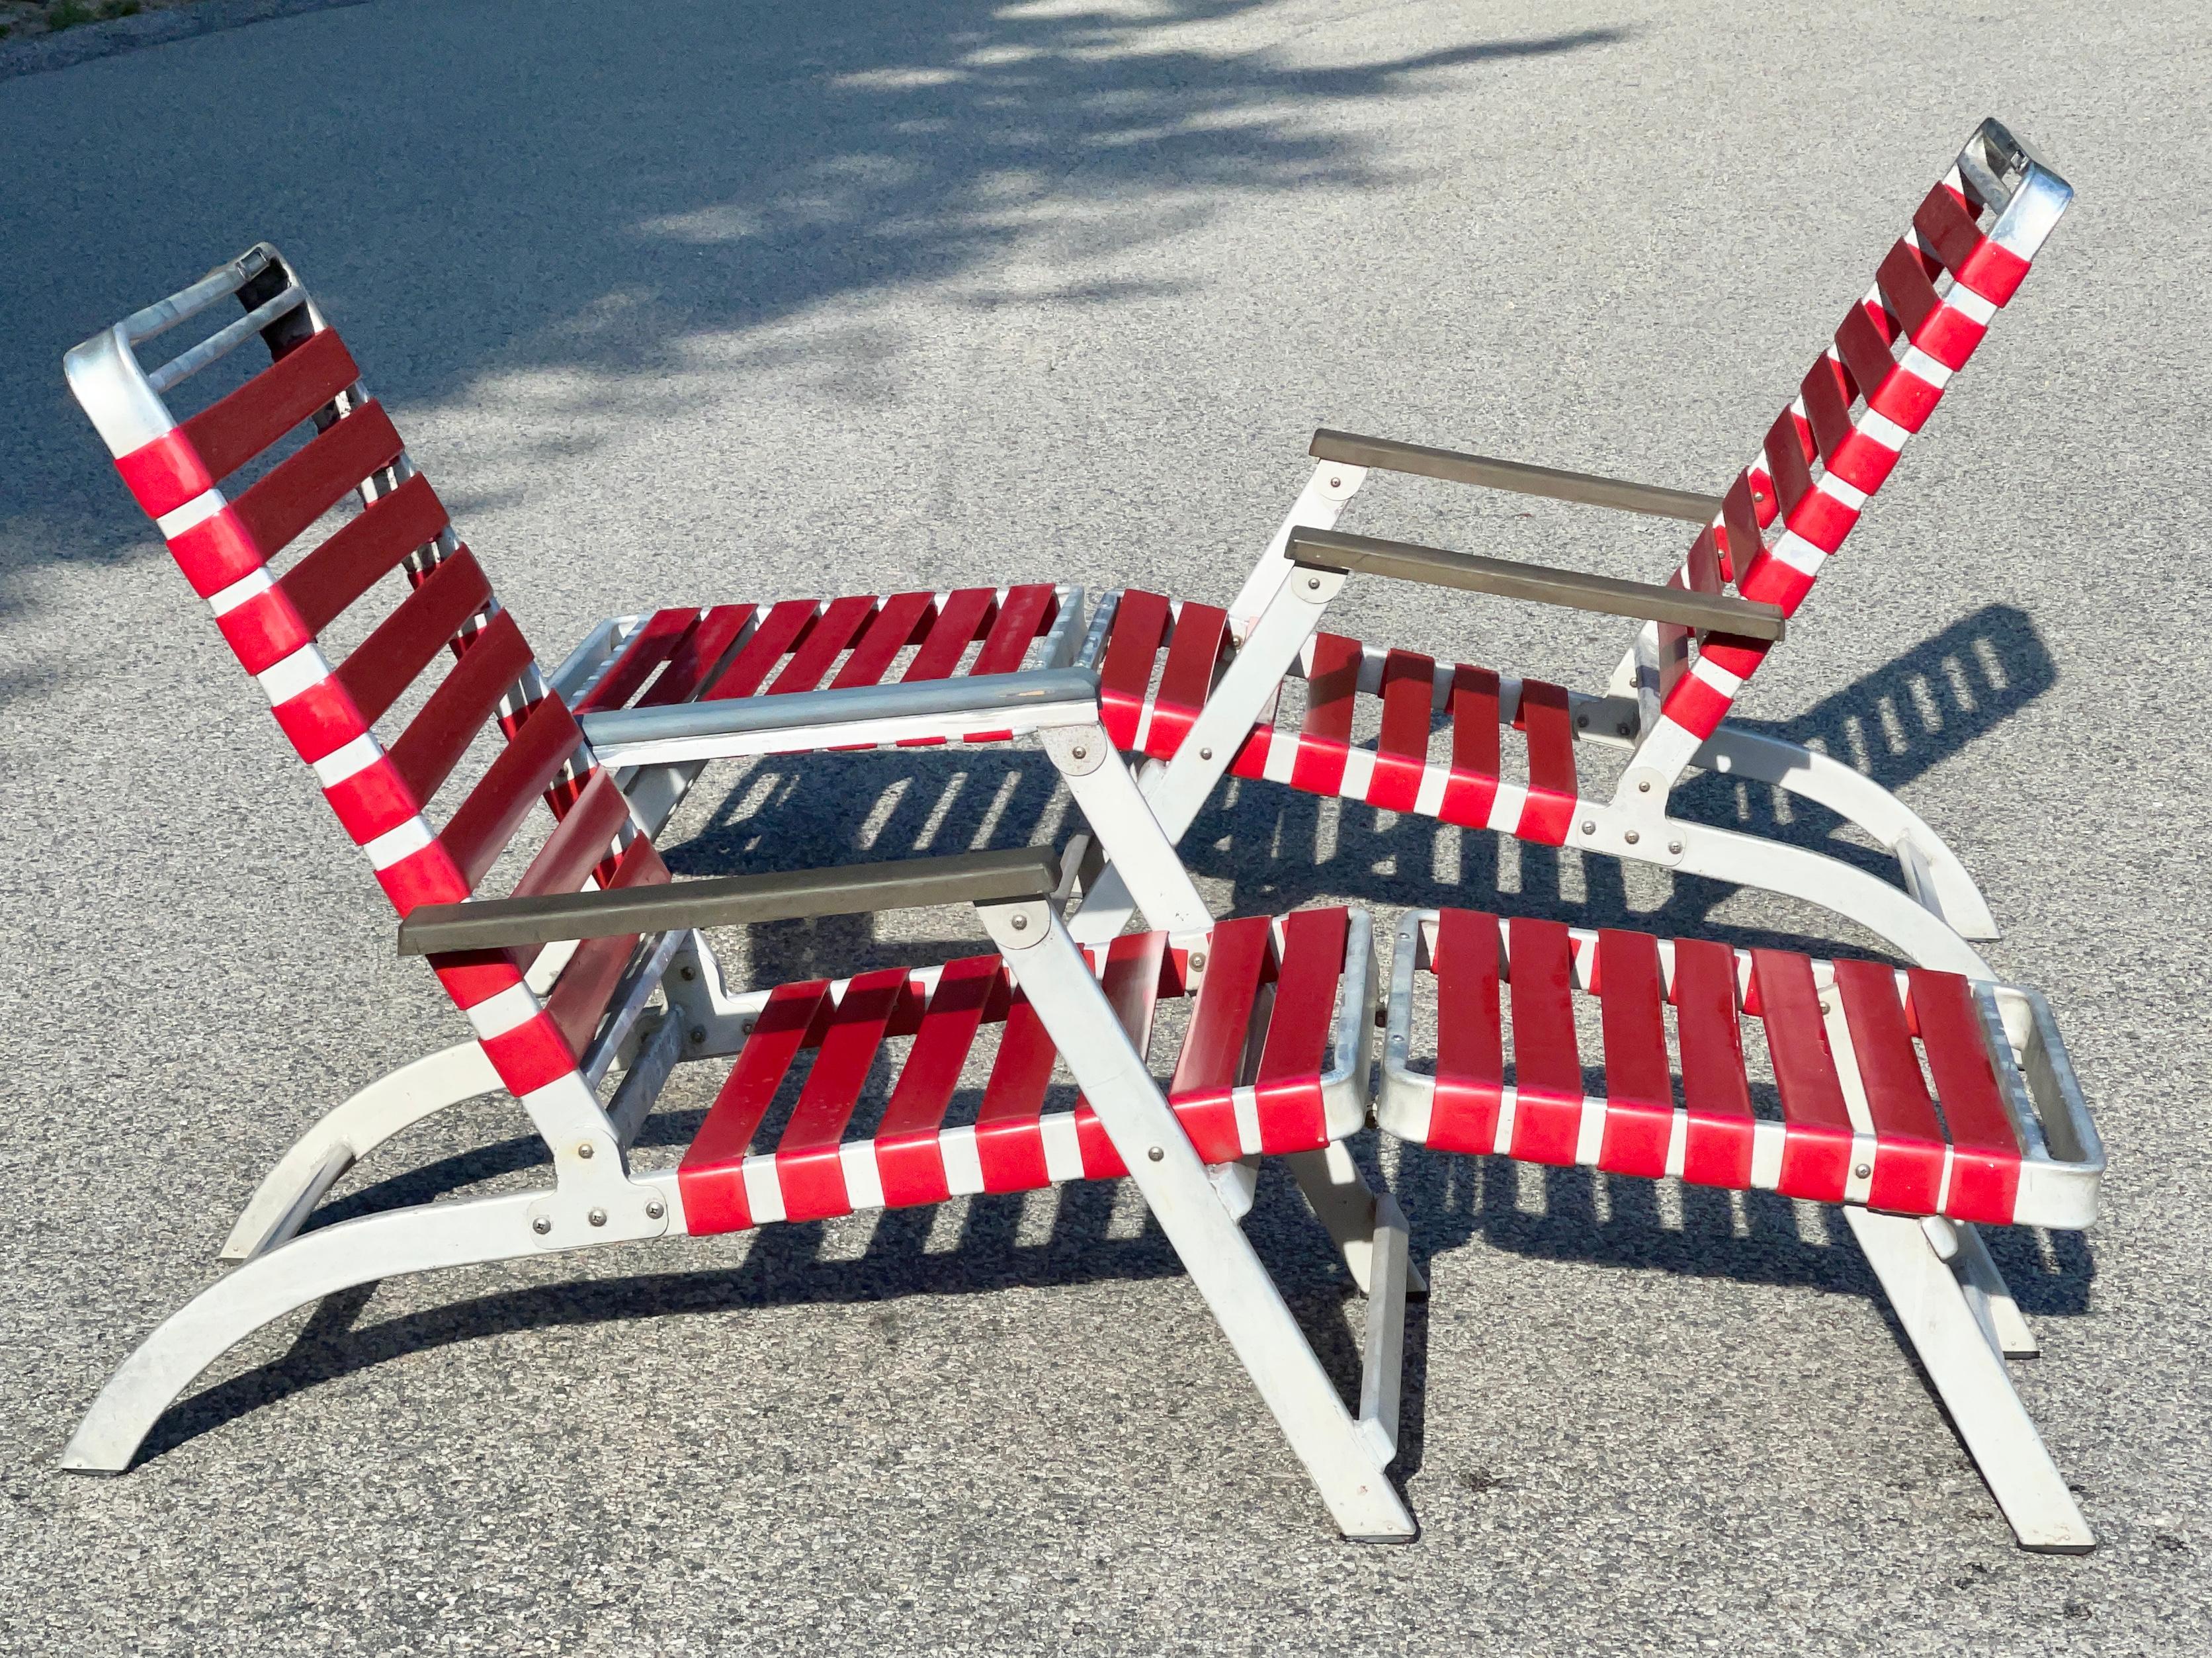 Aluminum SS United States Pair of Folding Deck Chairs by Troy Sunshade Co.